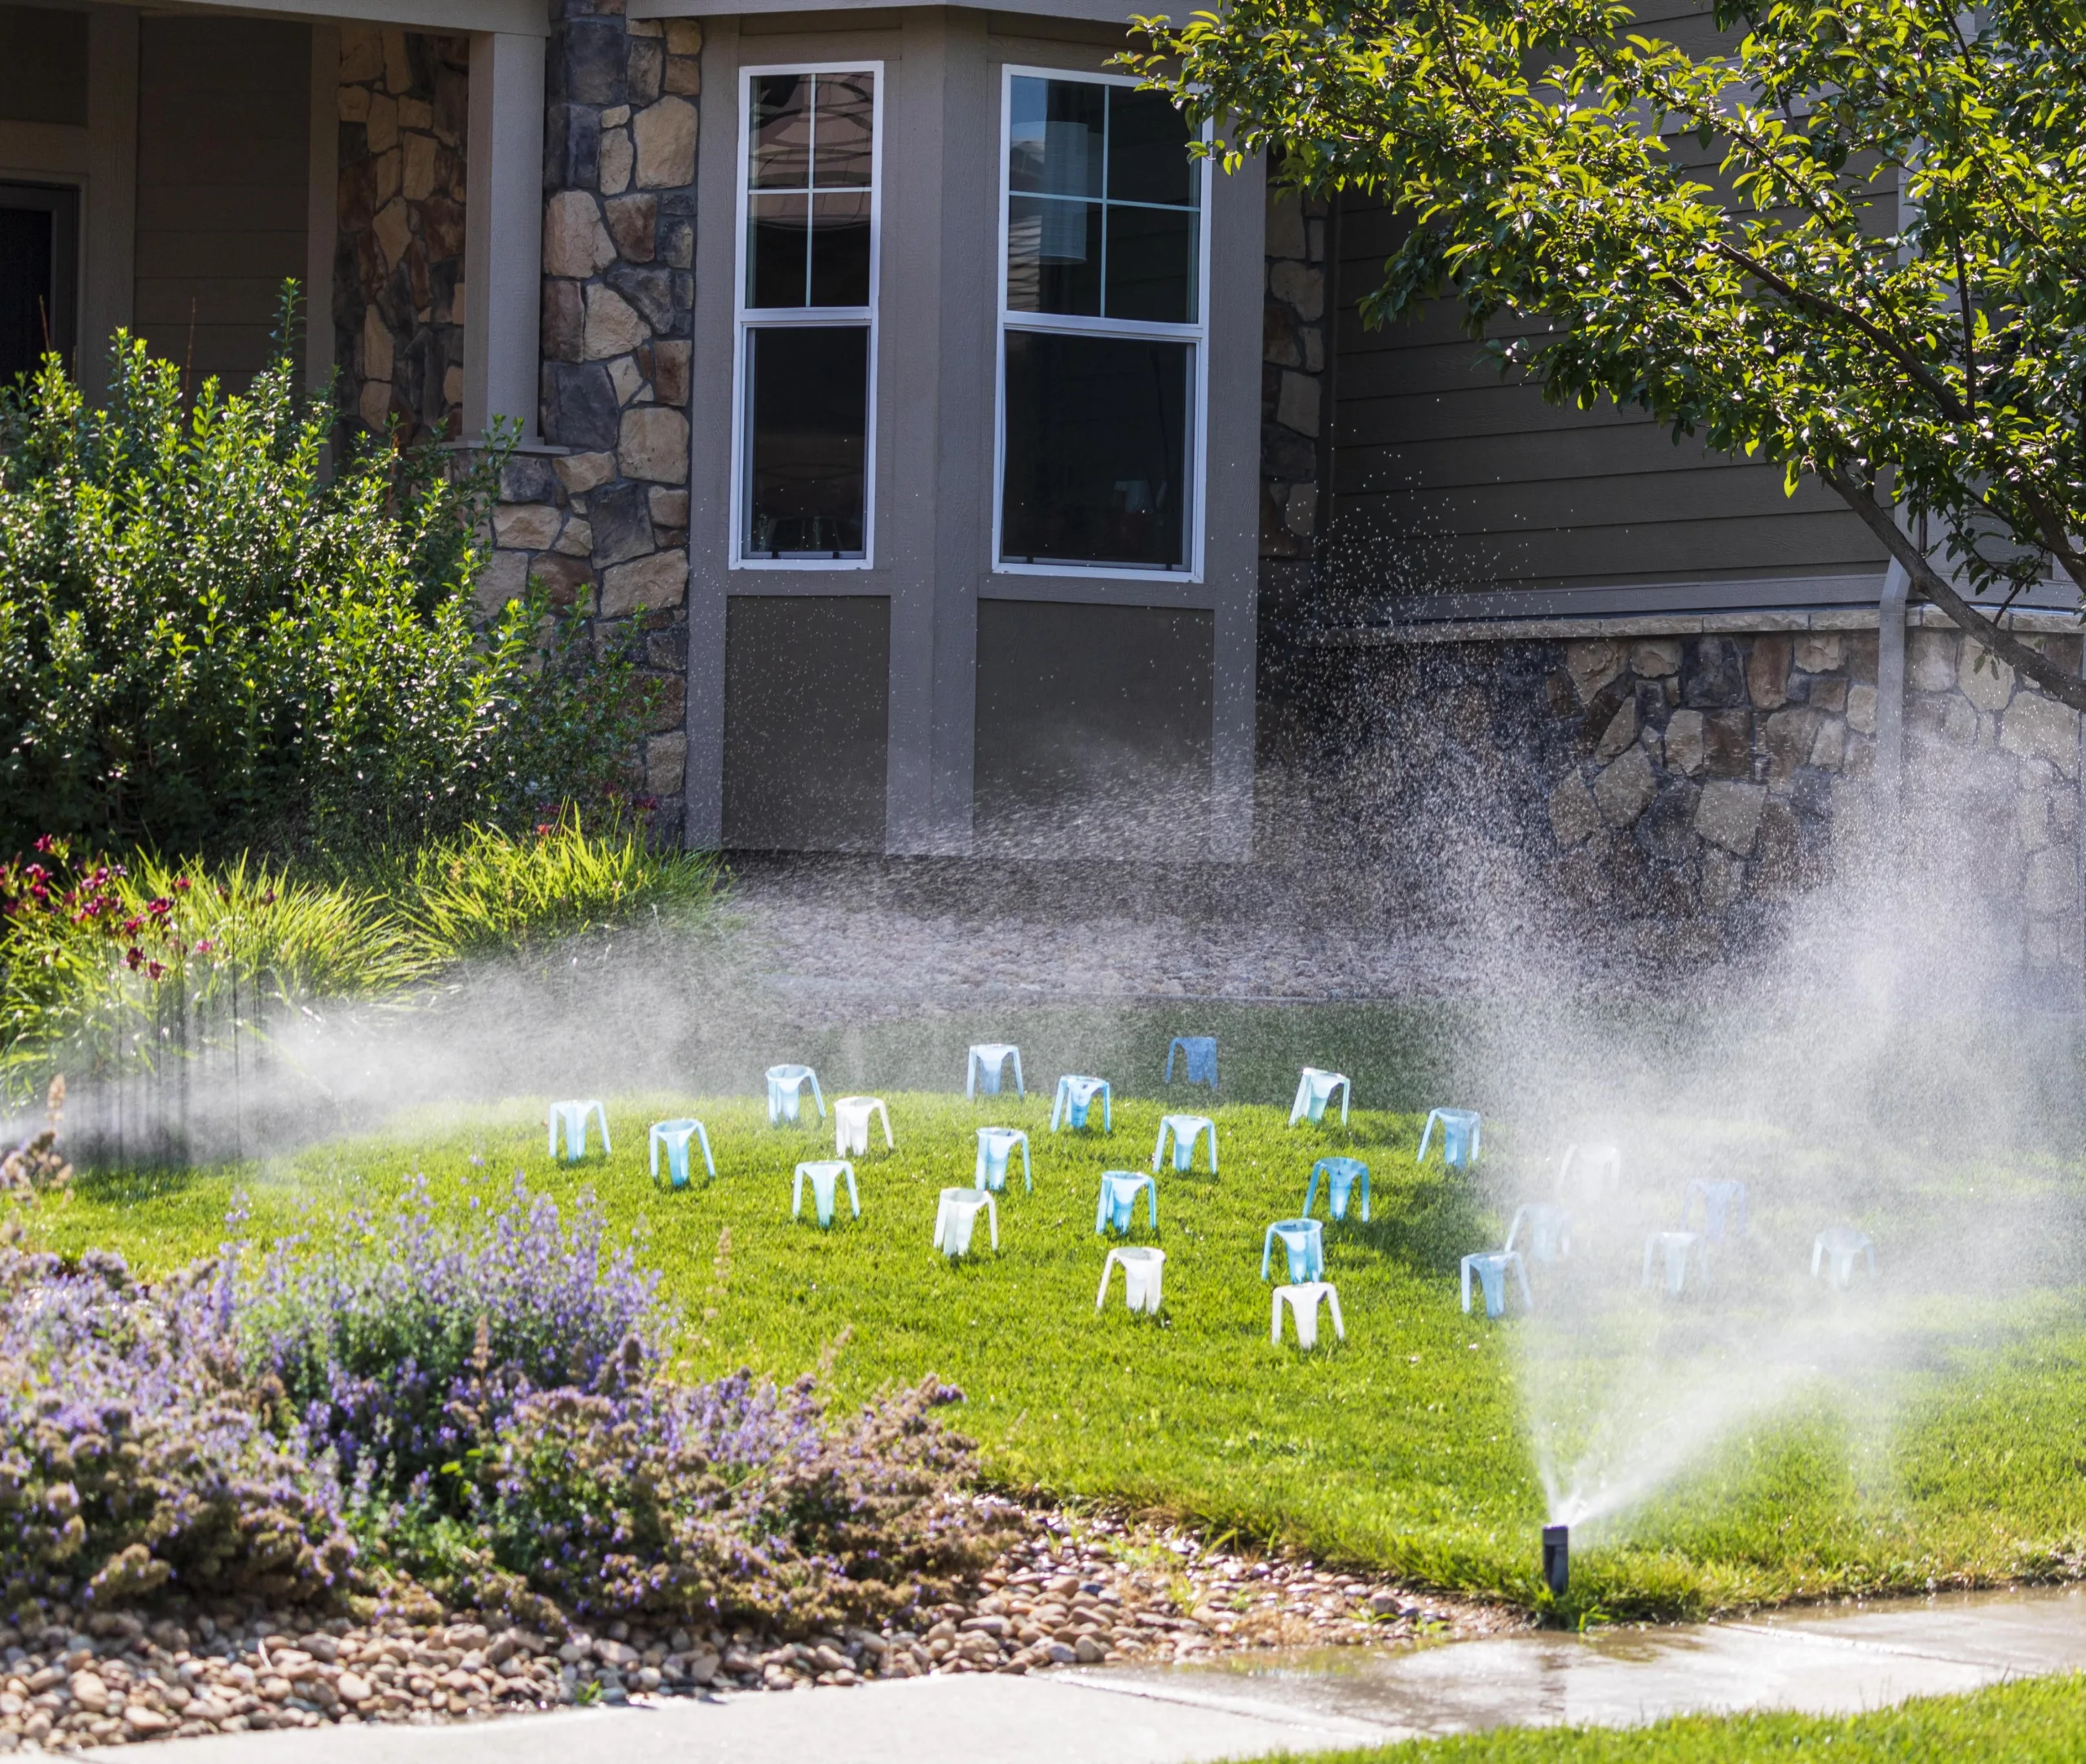 A sprinkler is spraying water on a lawn in front of a house. Collection cups are collecting water to measure how much water is used.